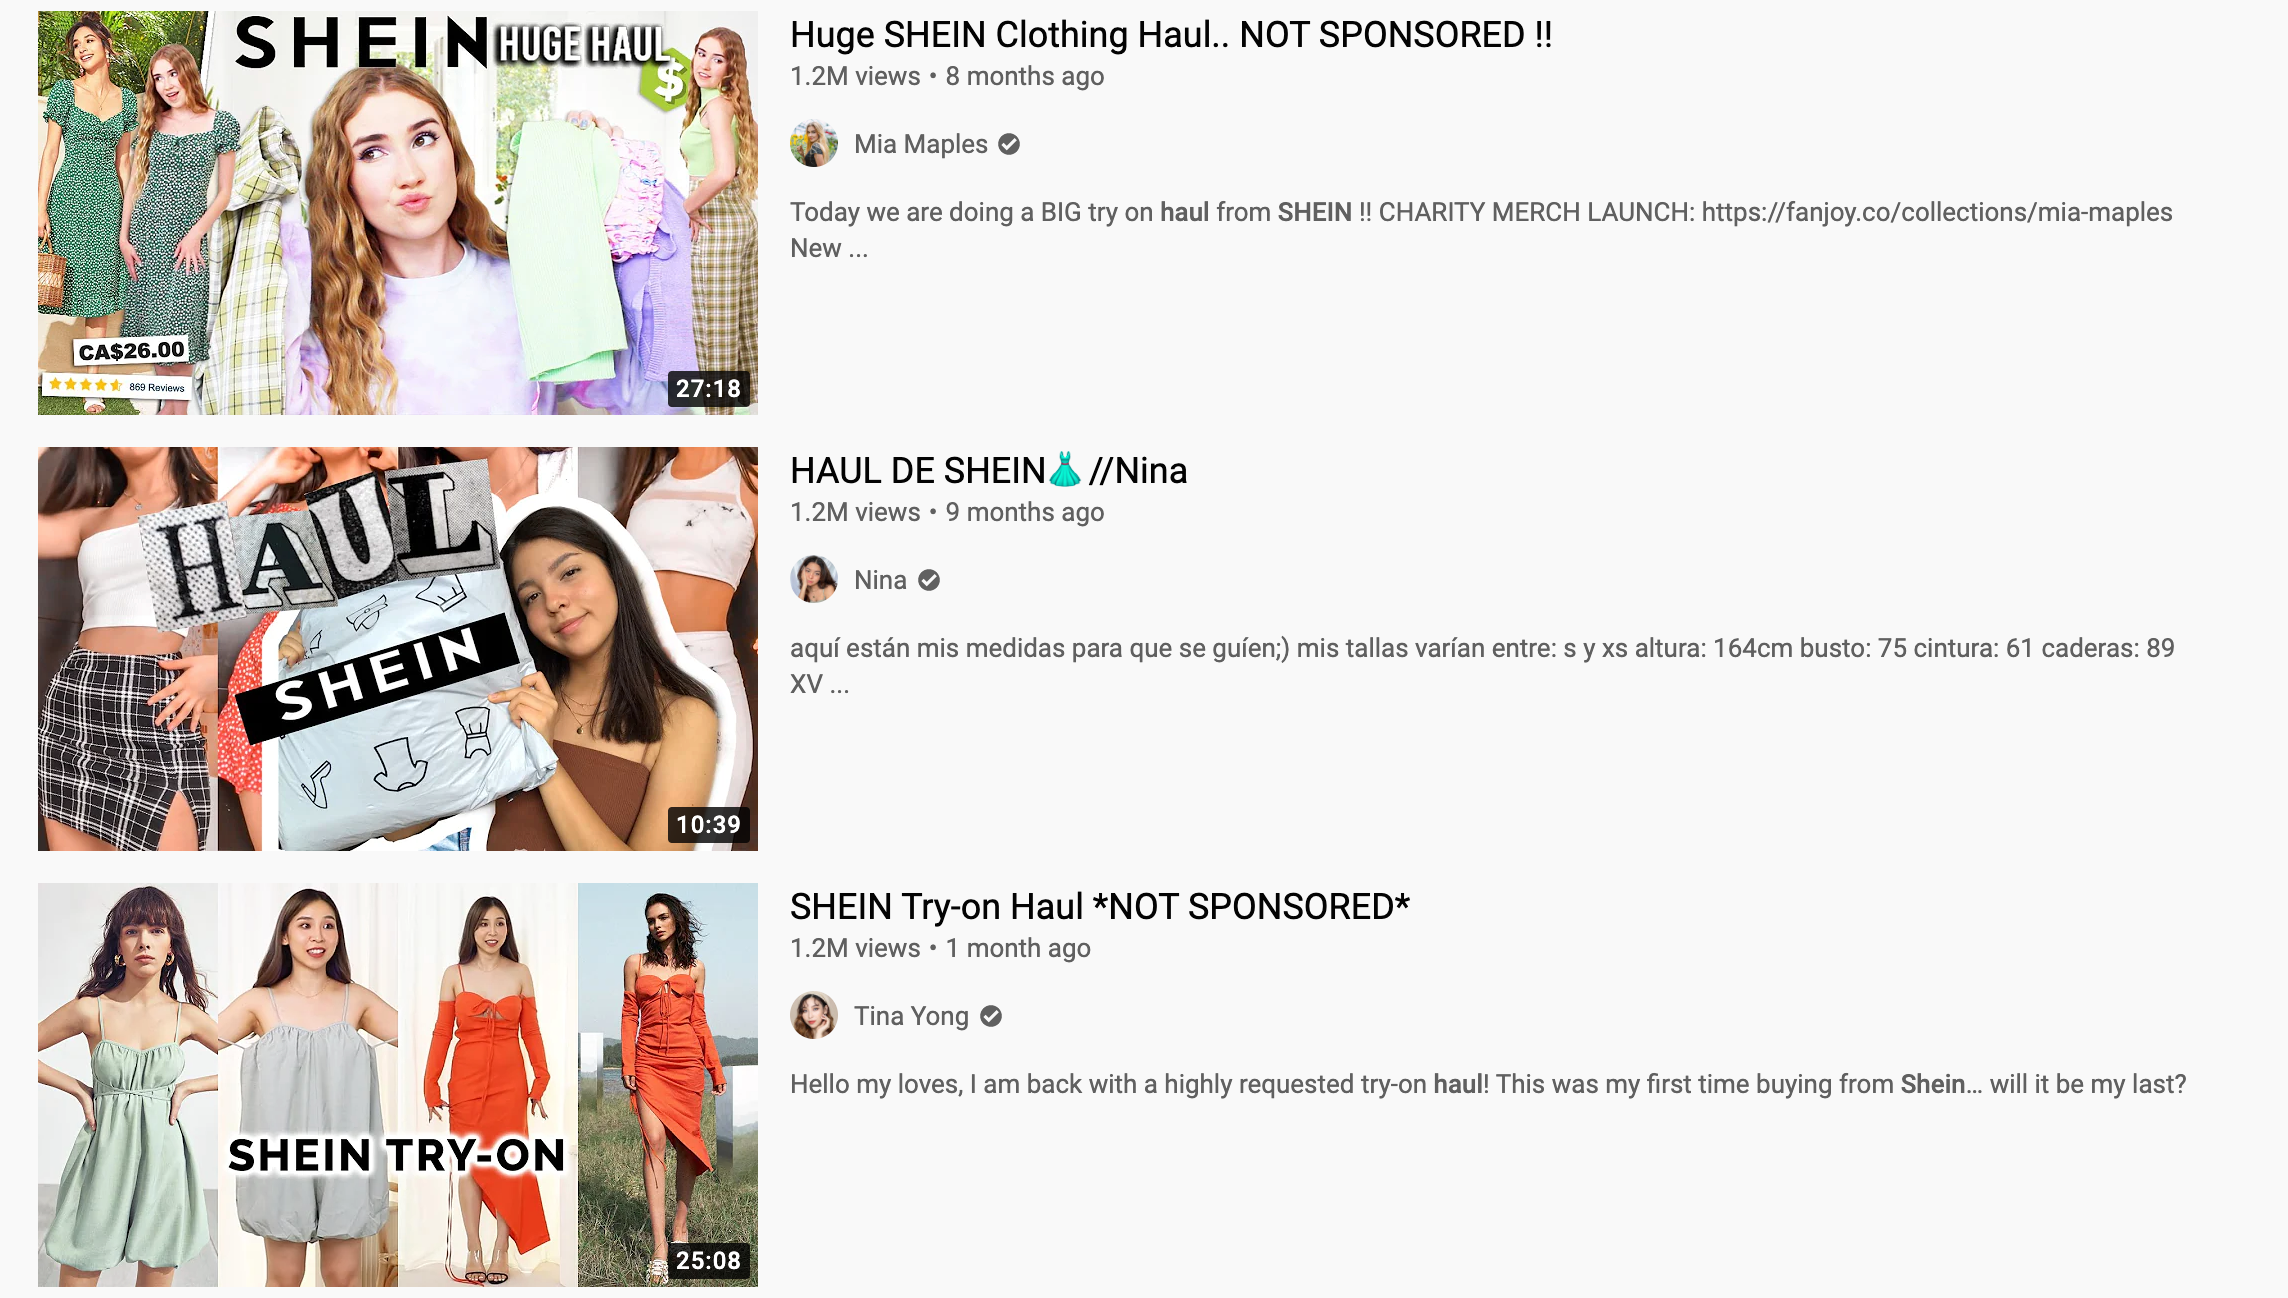 How China's Shein Conquered Global Social Media